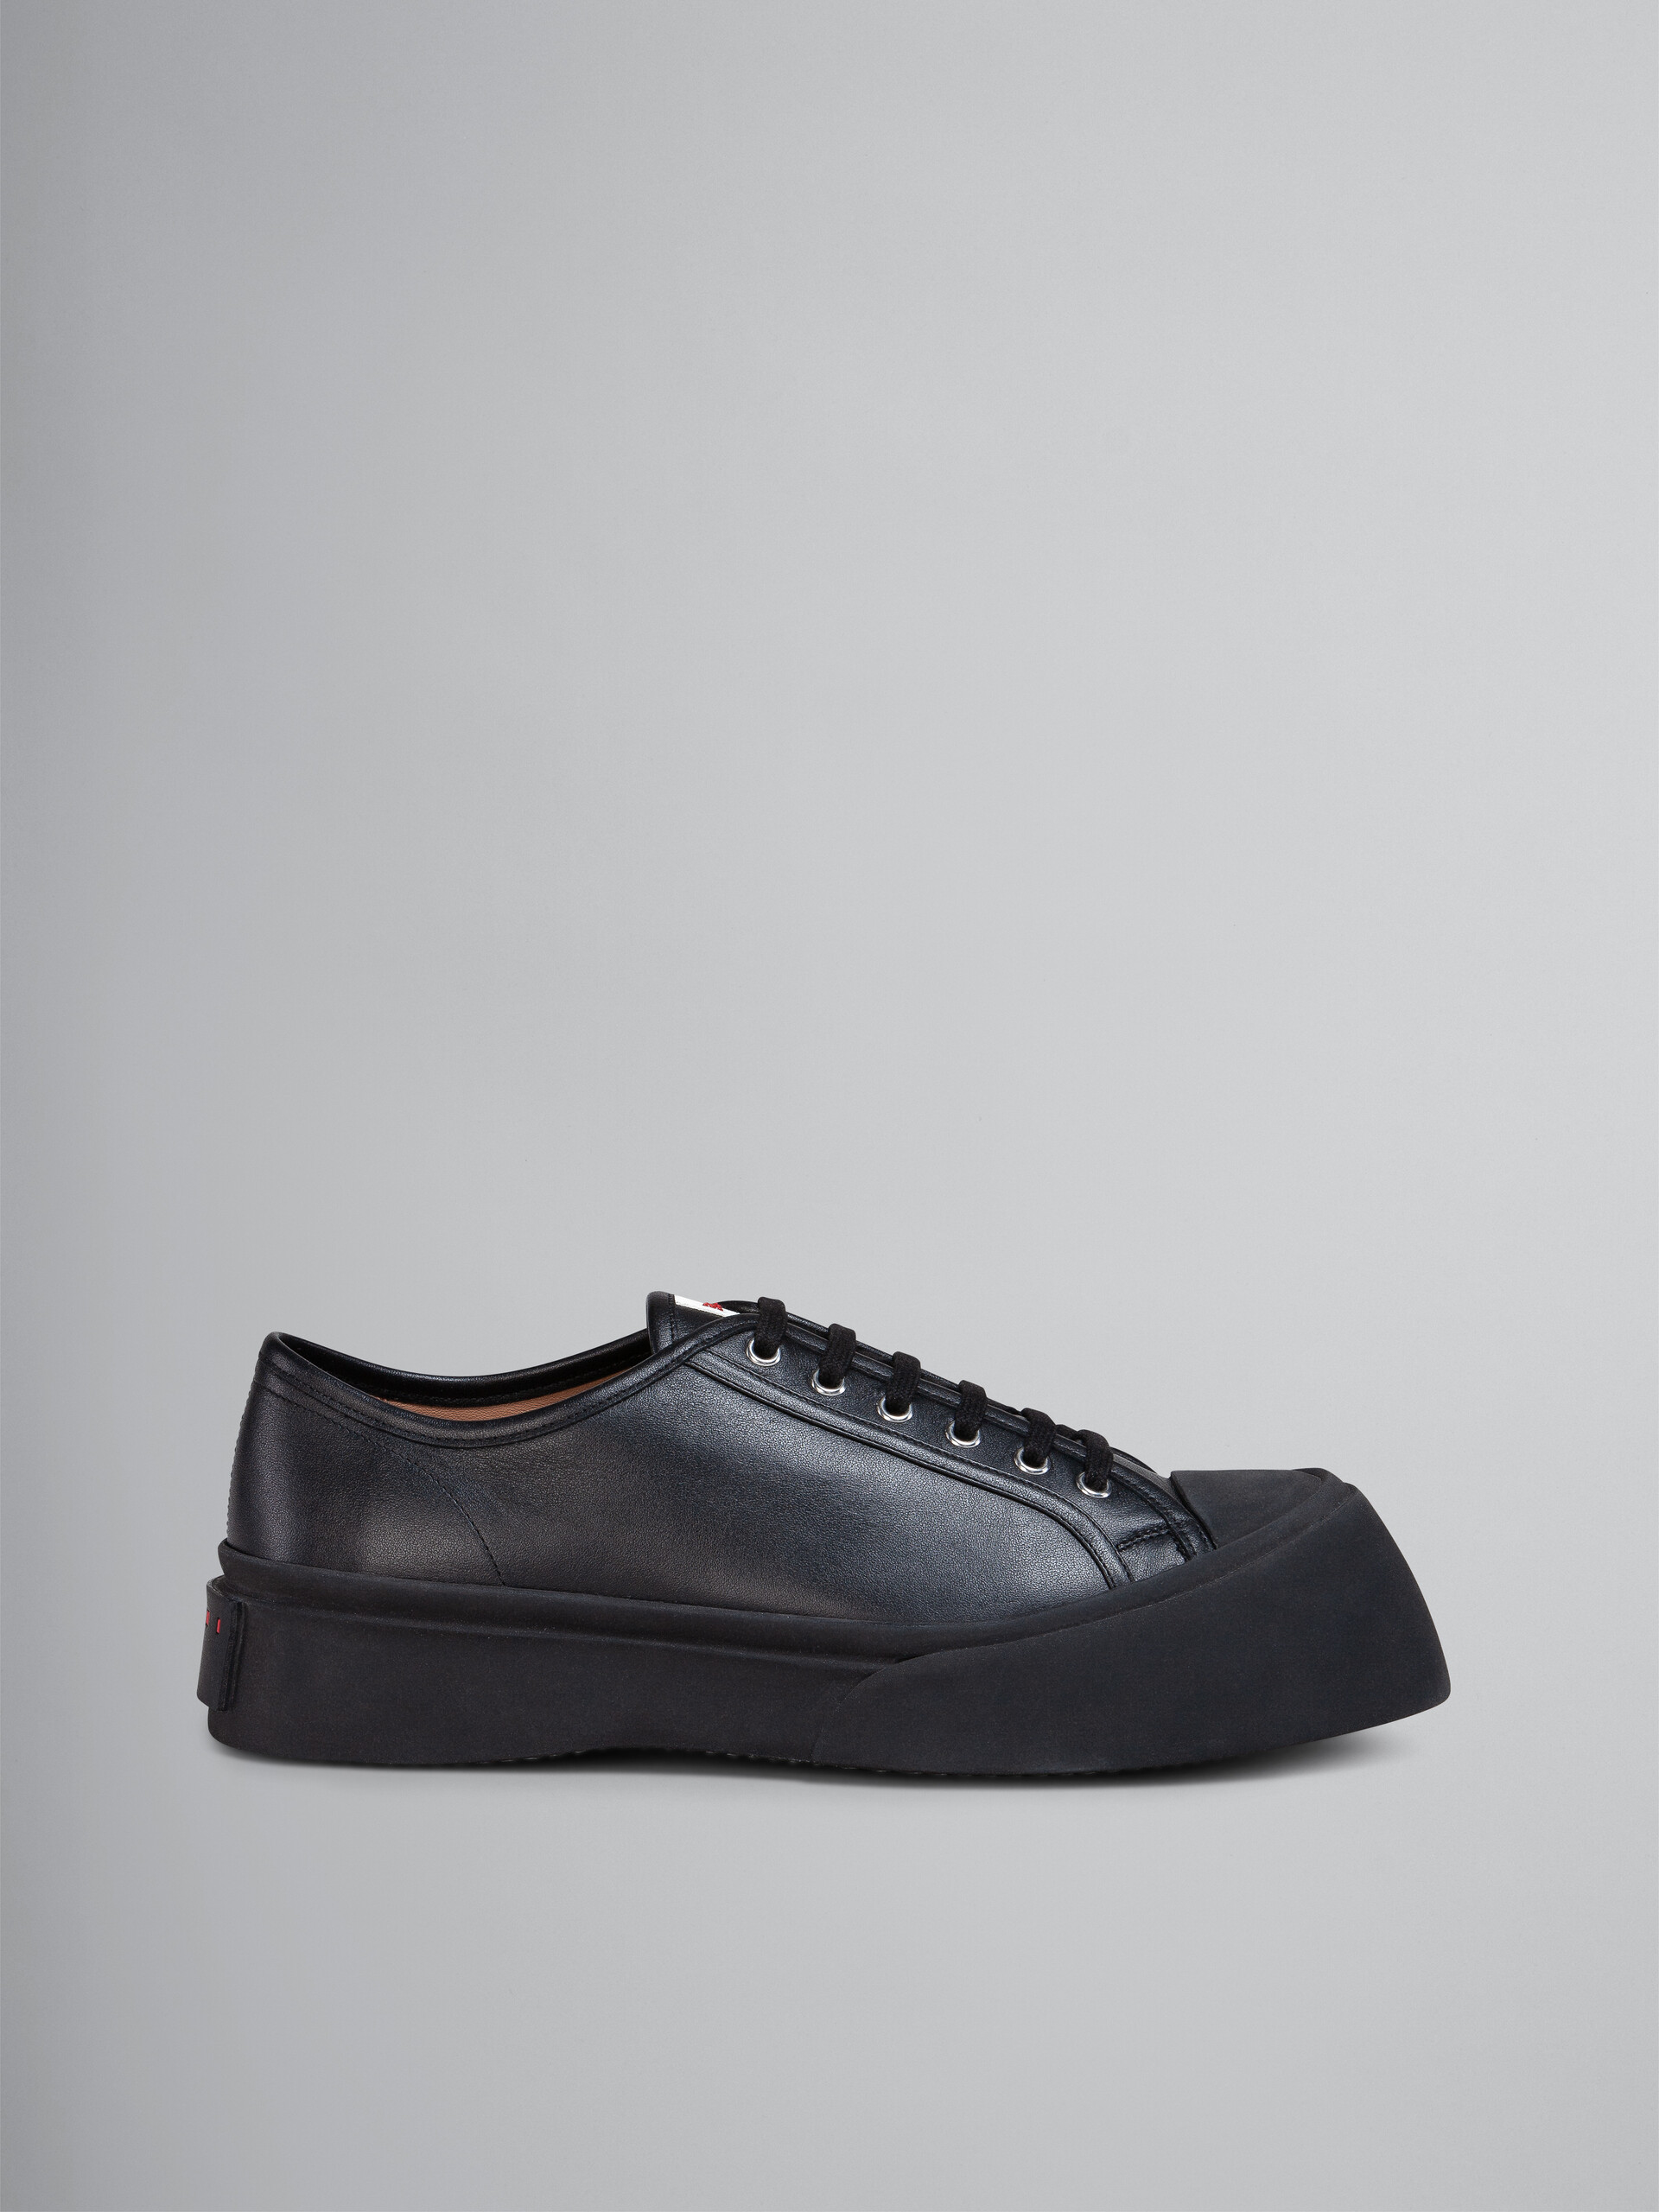 Soft calf leather PABLO sneaker - Sneakers - Image 1